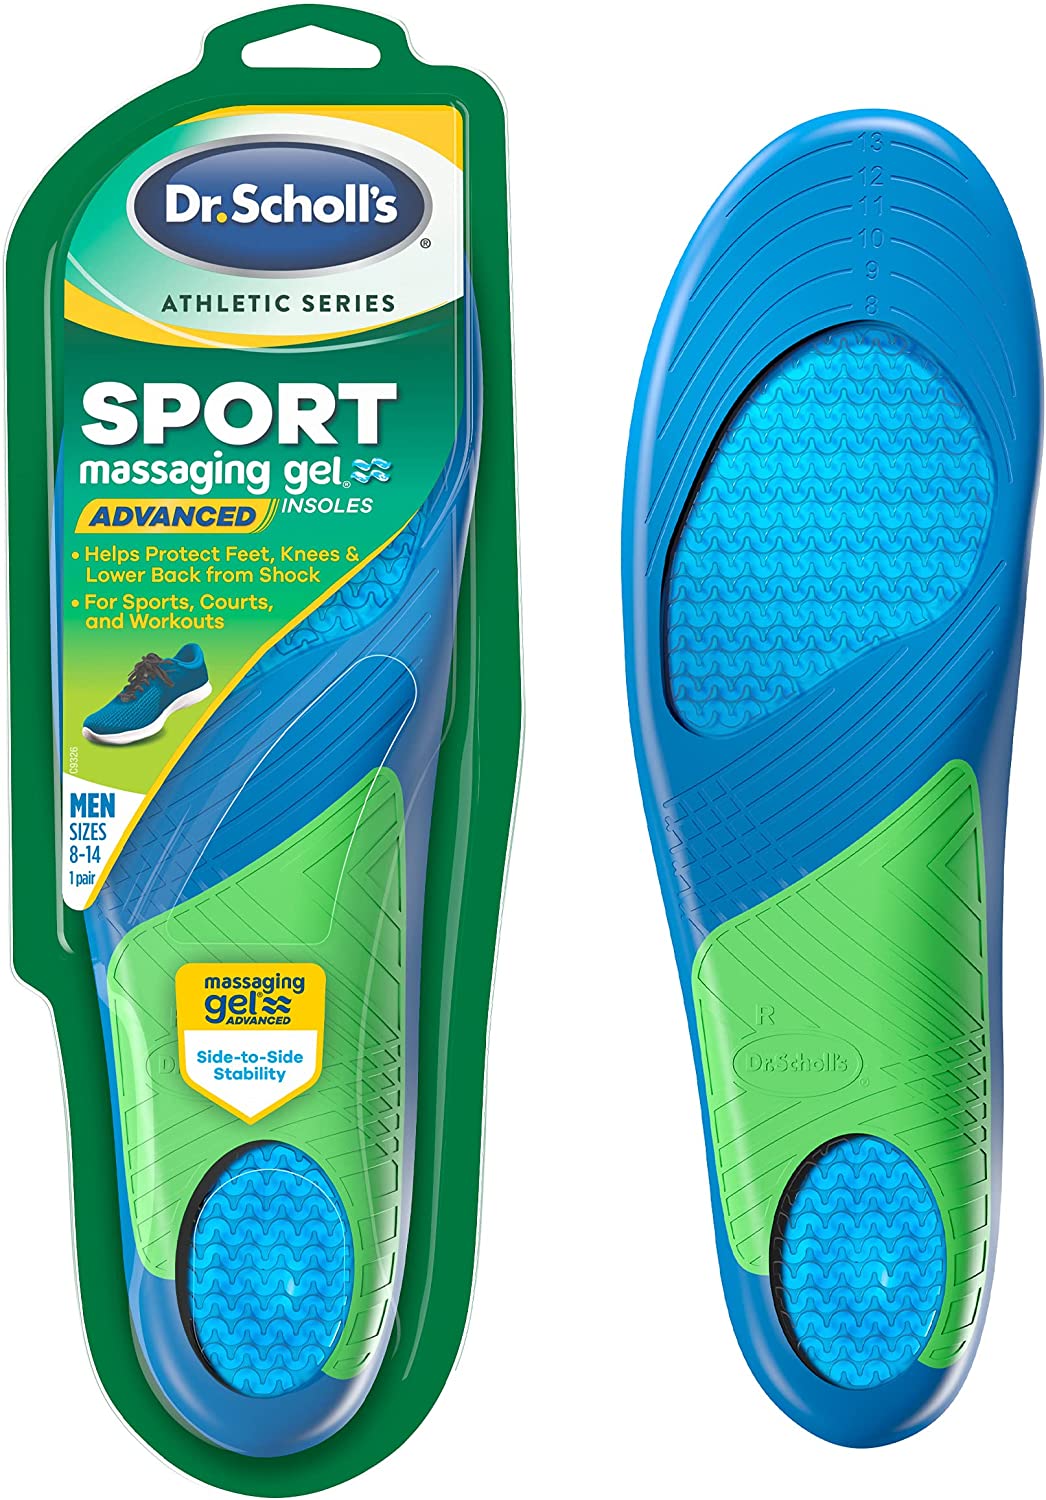 Dr. Scholl's All-Purpose Sport & Fitness Comfort Insoles 1 Pair, Trim to Fit - 3alababak